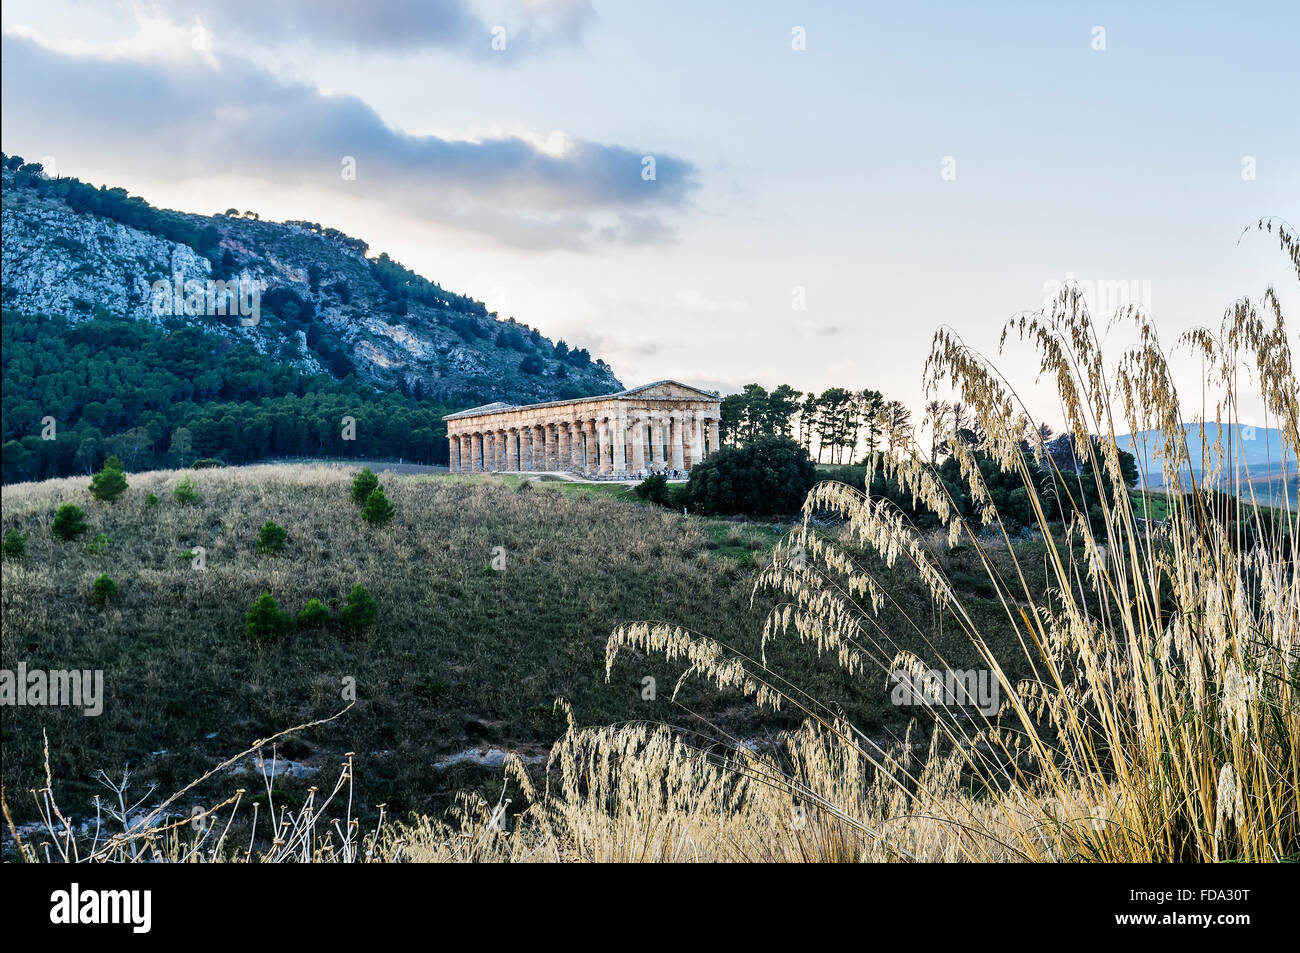 The Doric Temple at Segesta, Sicily built in late 5th century BC Stock Photo